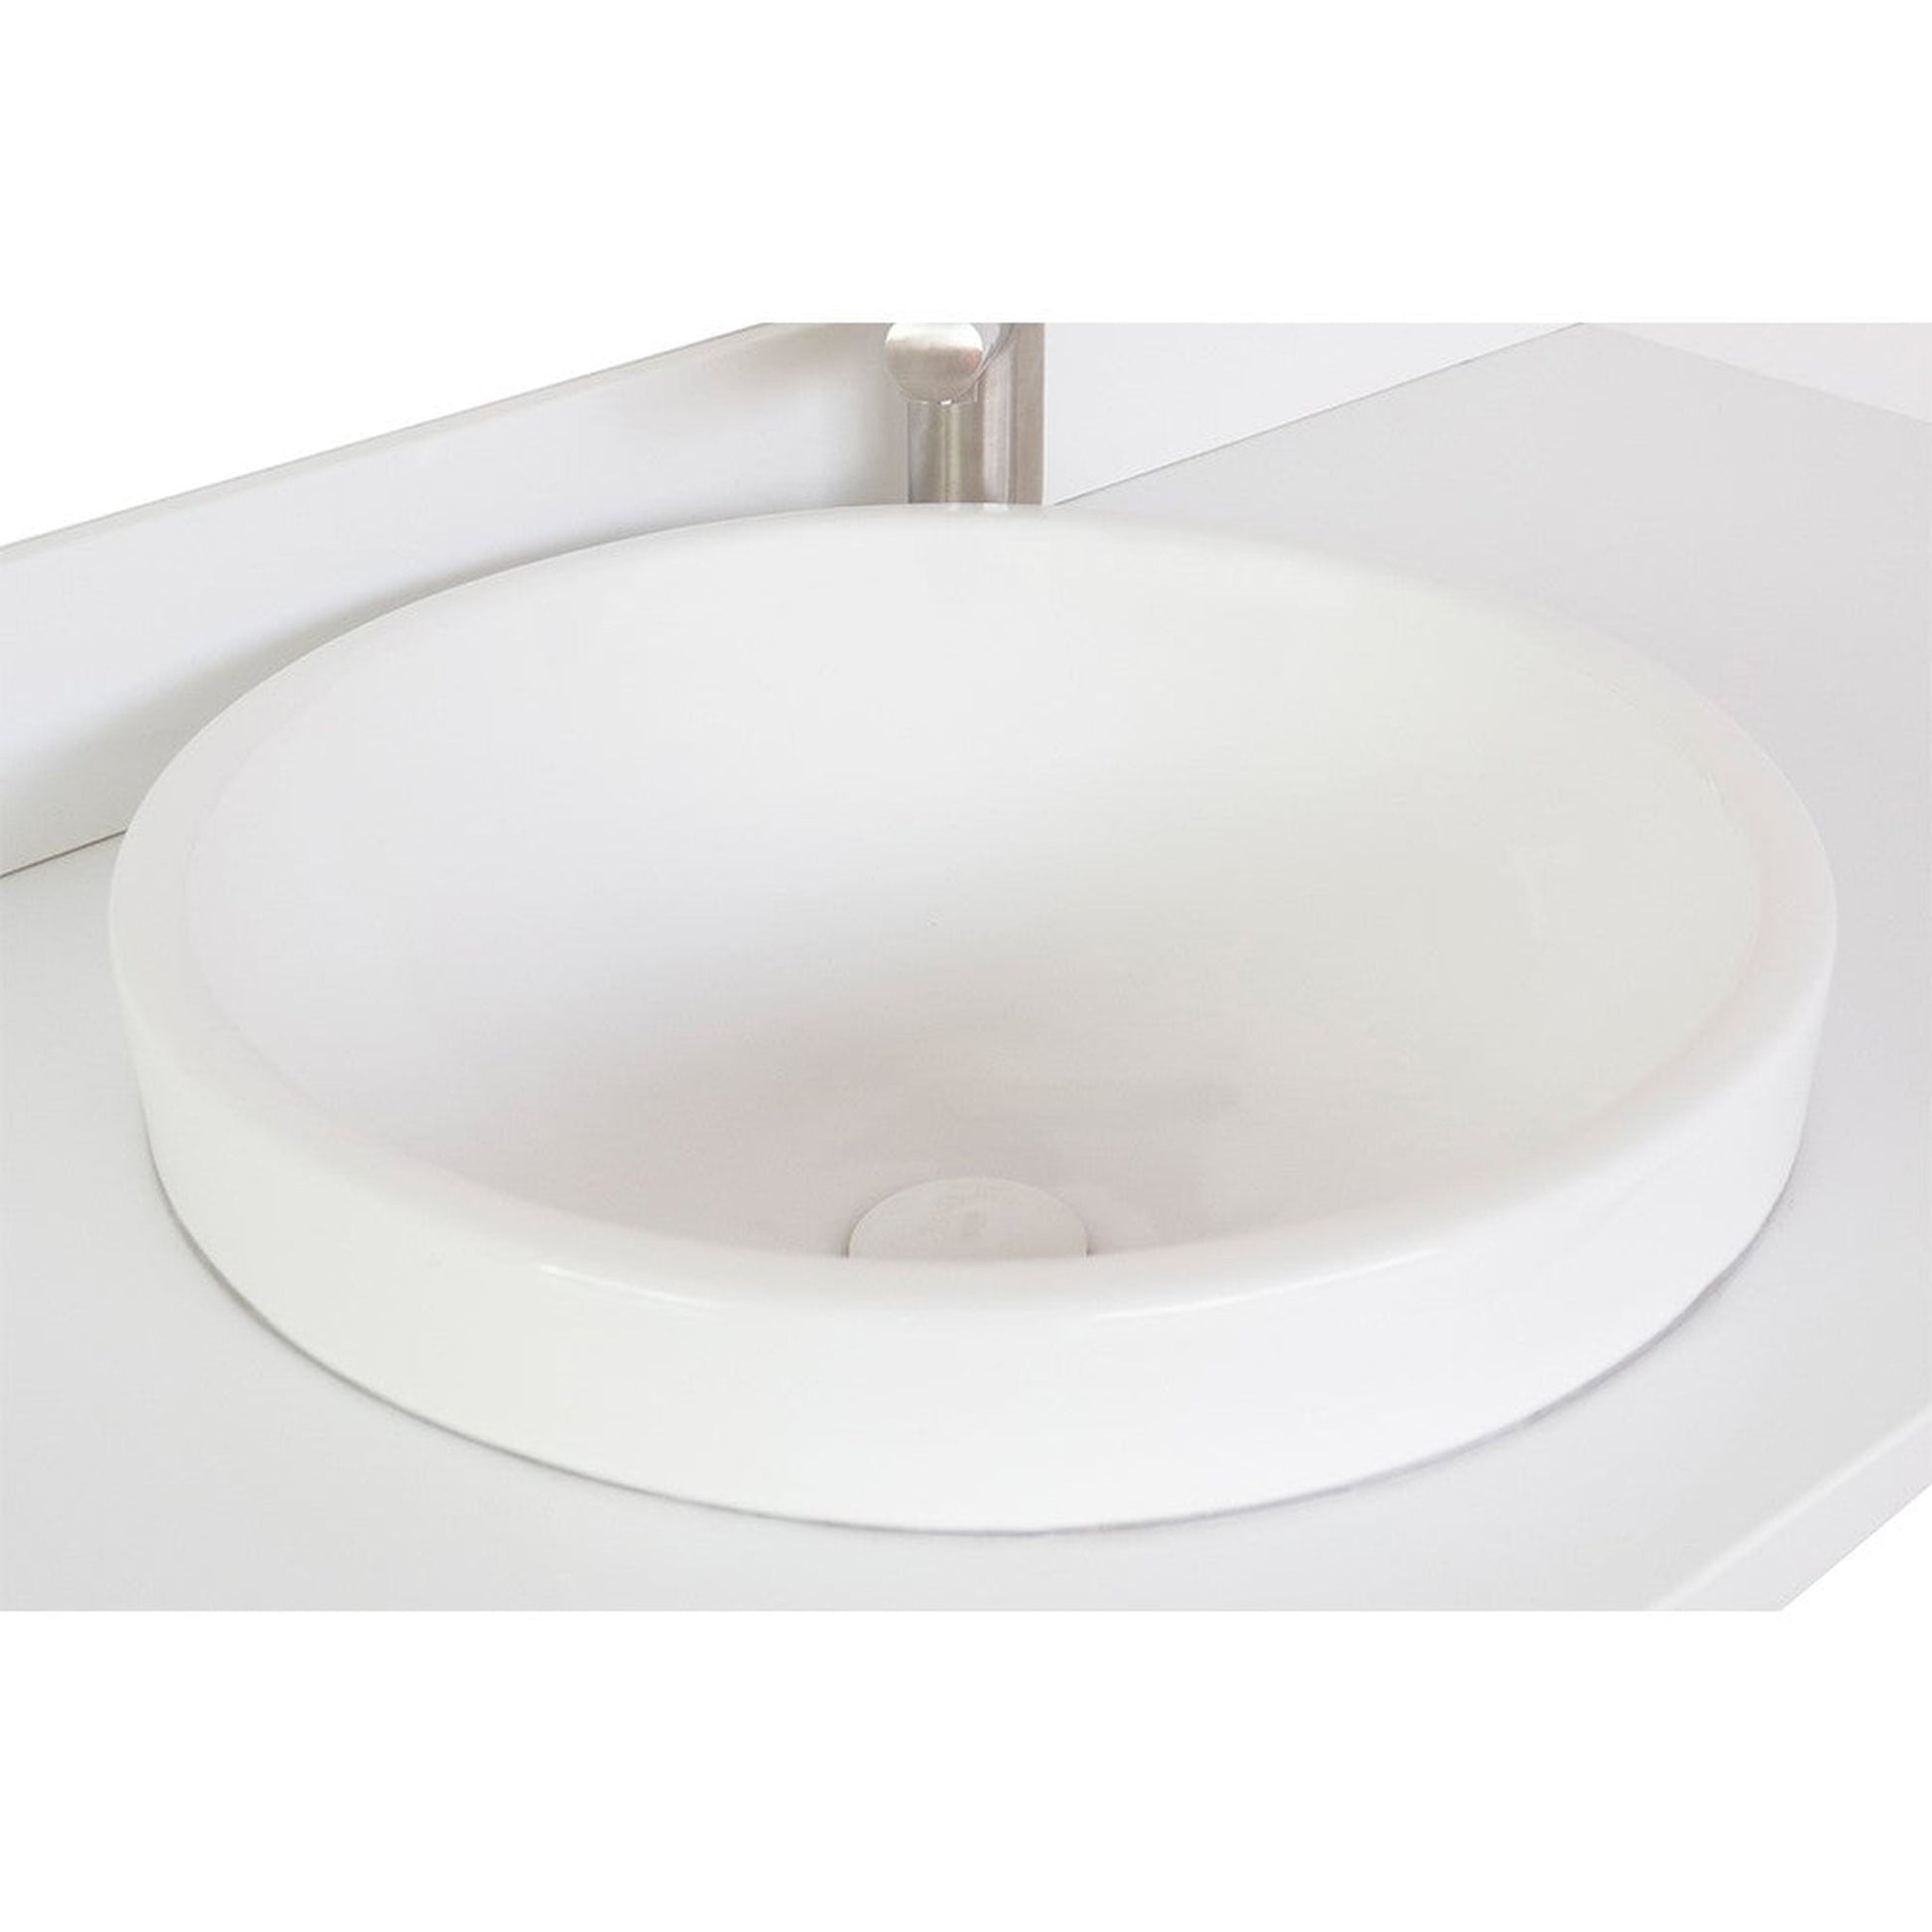 Bellaterra Home 31" x 22" White Quartz Vanity Top With Semi-recessed Round Sink and Overflow